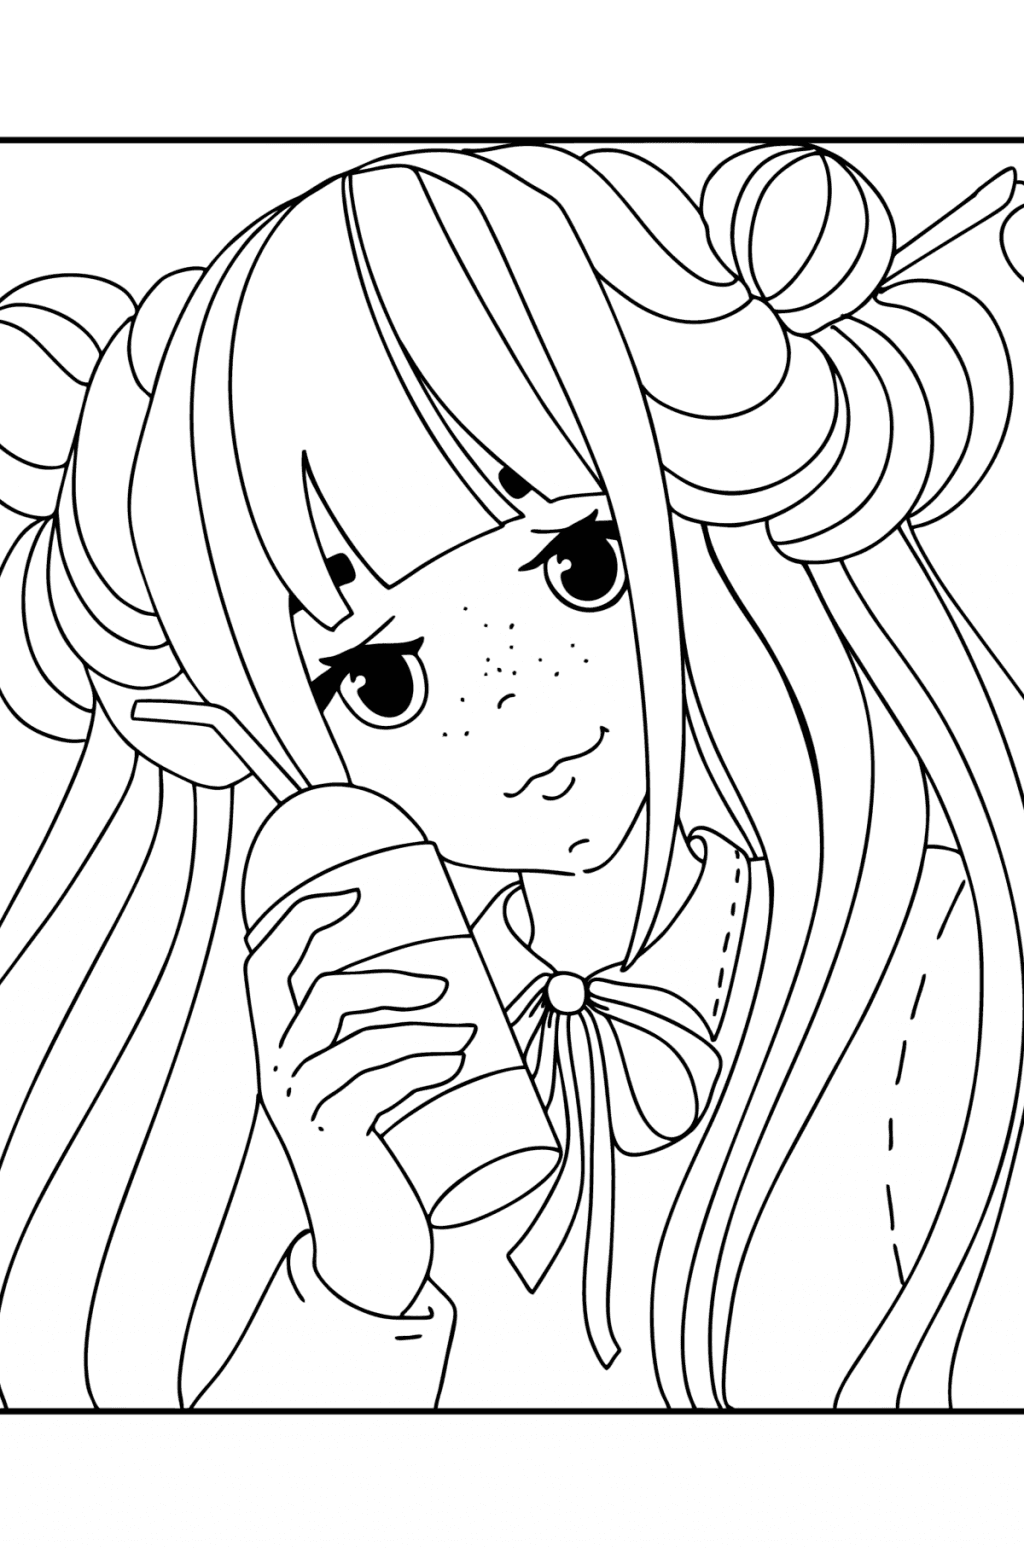 Anime coloring page for Kids ♥ Print and Online Free!